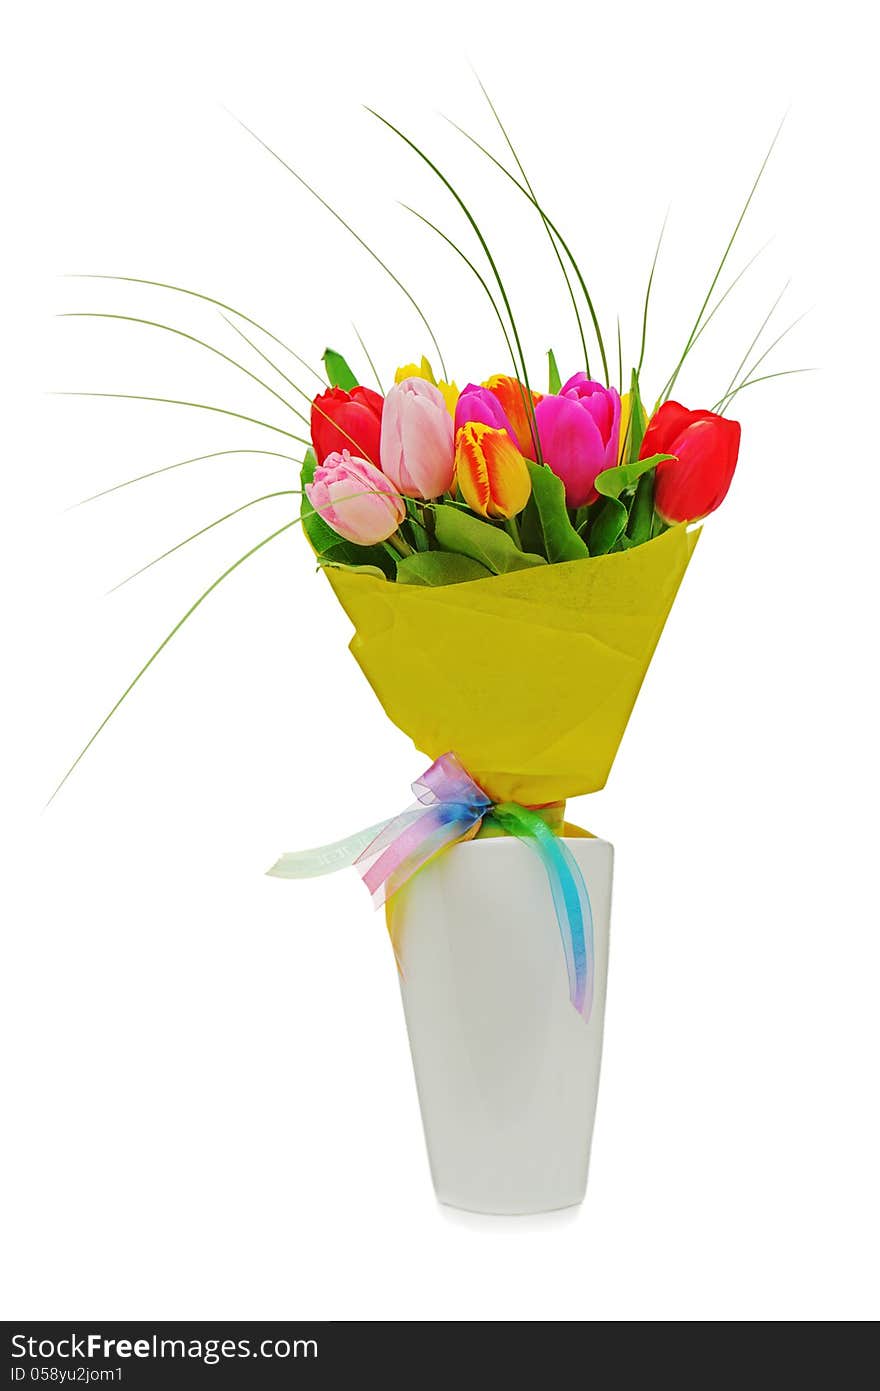 Flower bouquet from colorful tulips in white vase isolated on white background.